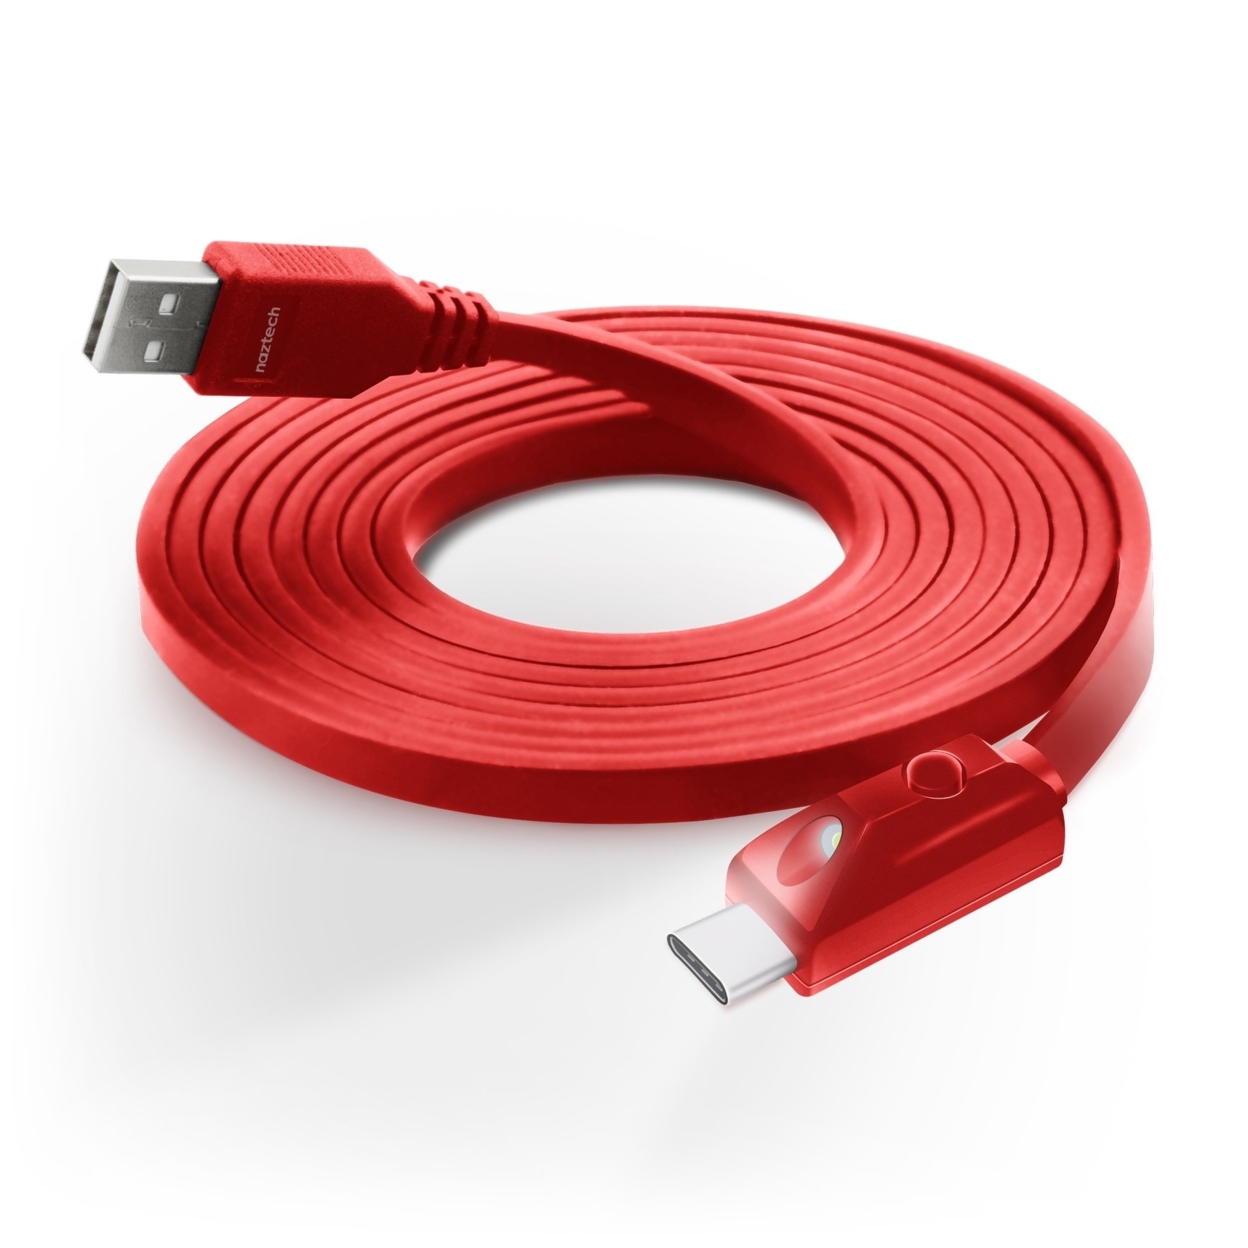 Naztech LED USB-A To USB-C 2.0 Charge & Sync Cable 6ft (USBCABLE8-PRNT) - Red